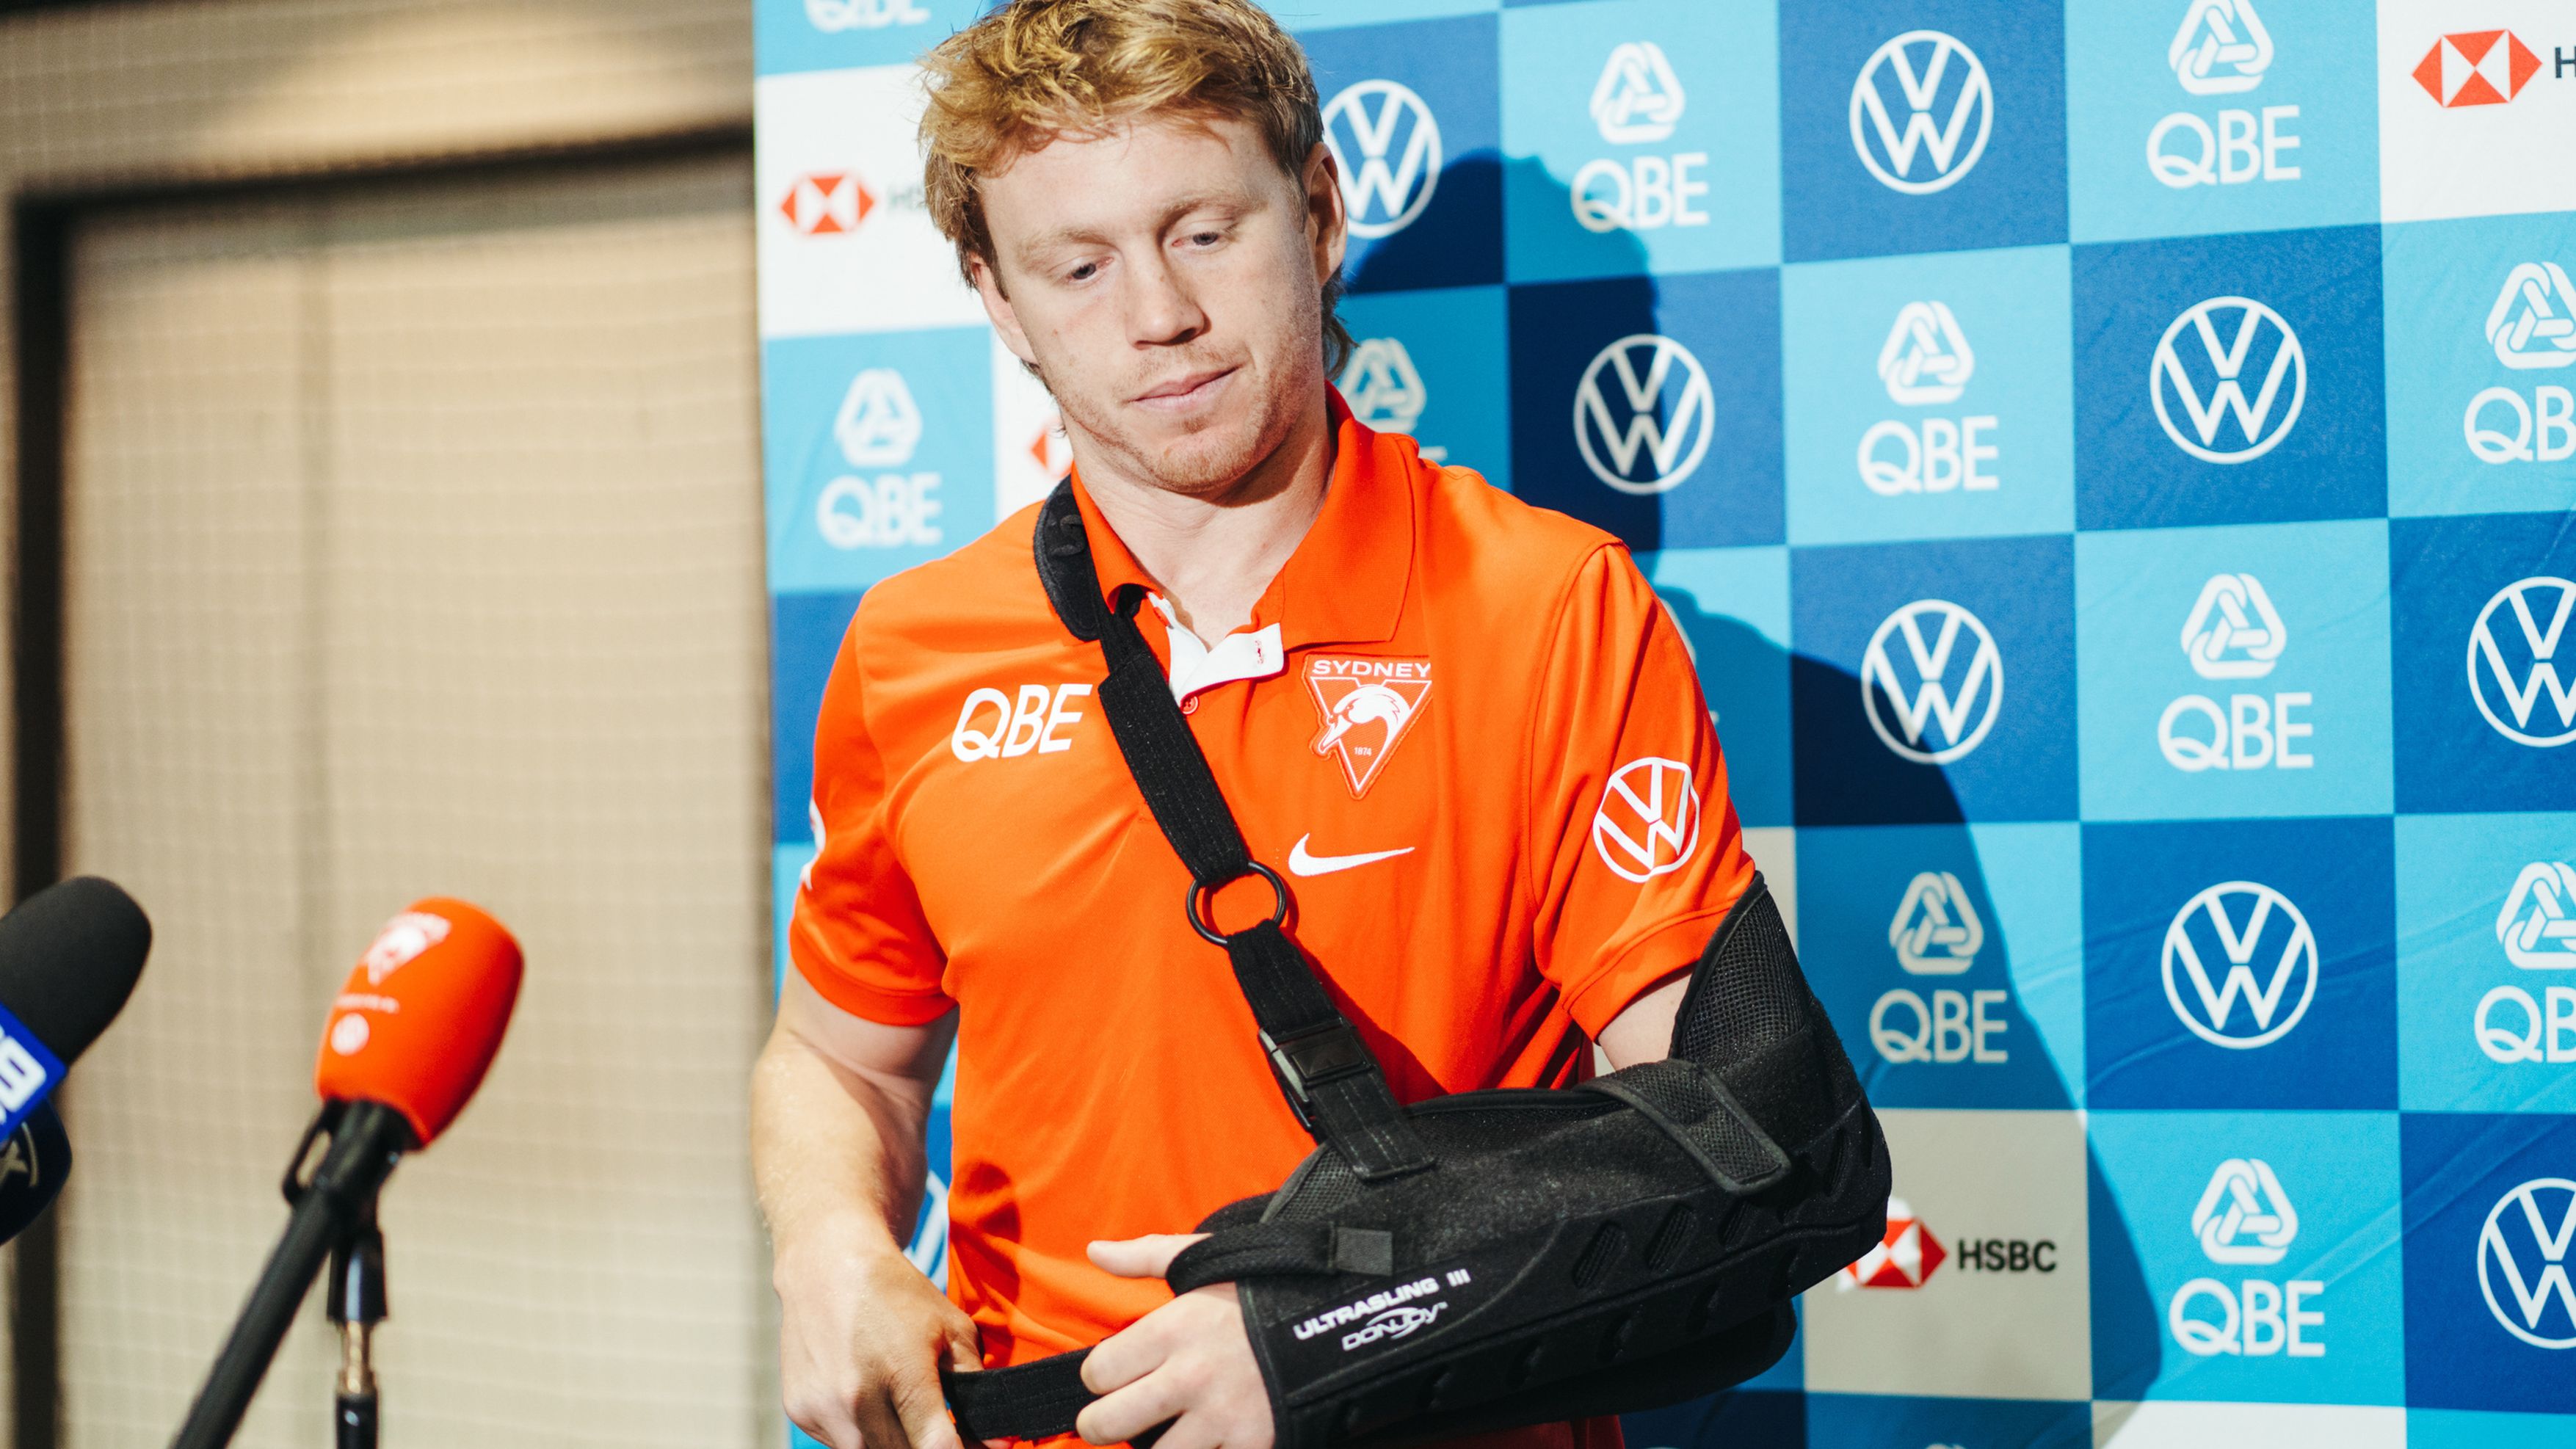 Sydney Swans co-captain Callum Mills at a press conference to talk about his injury.